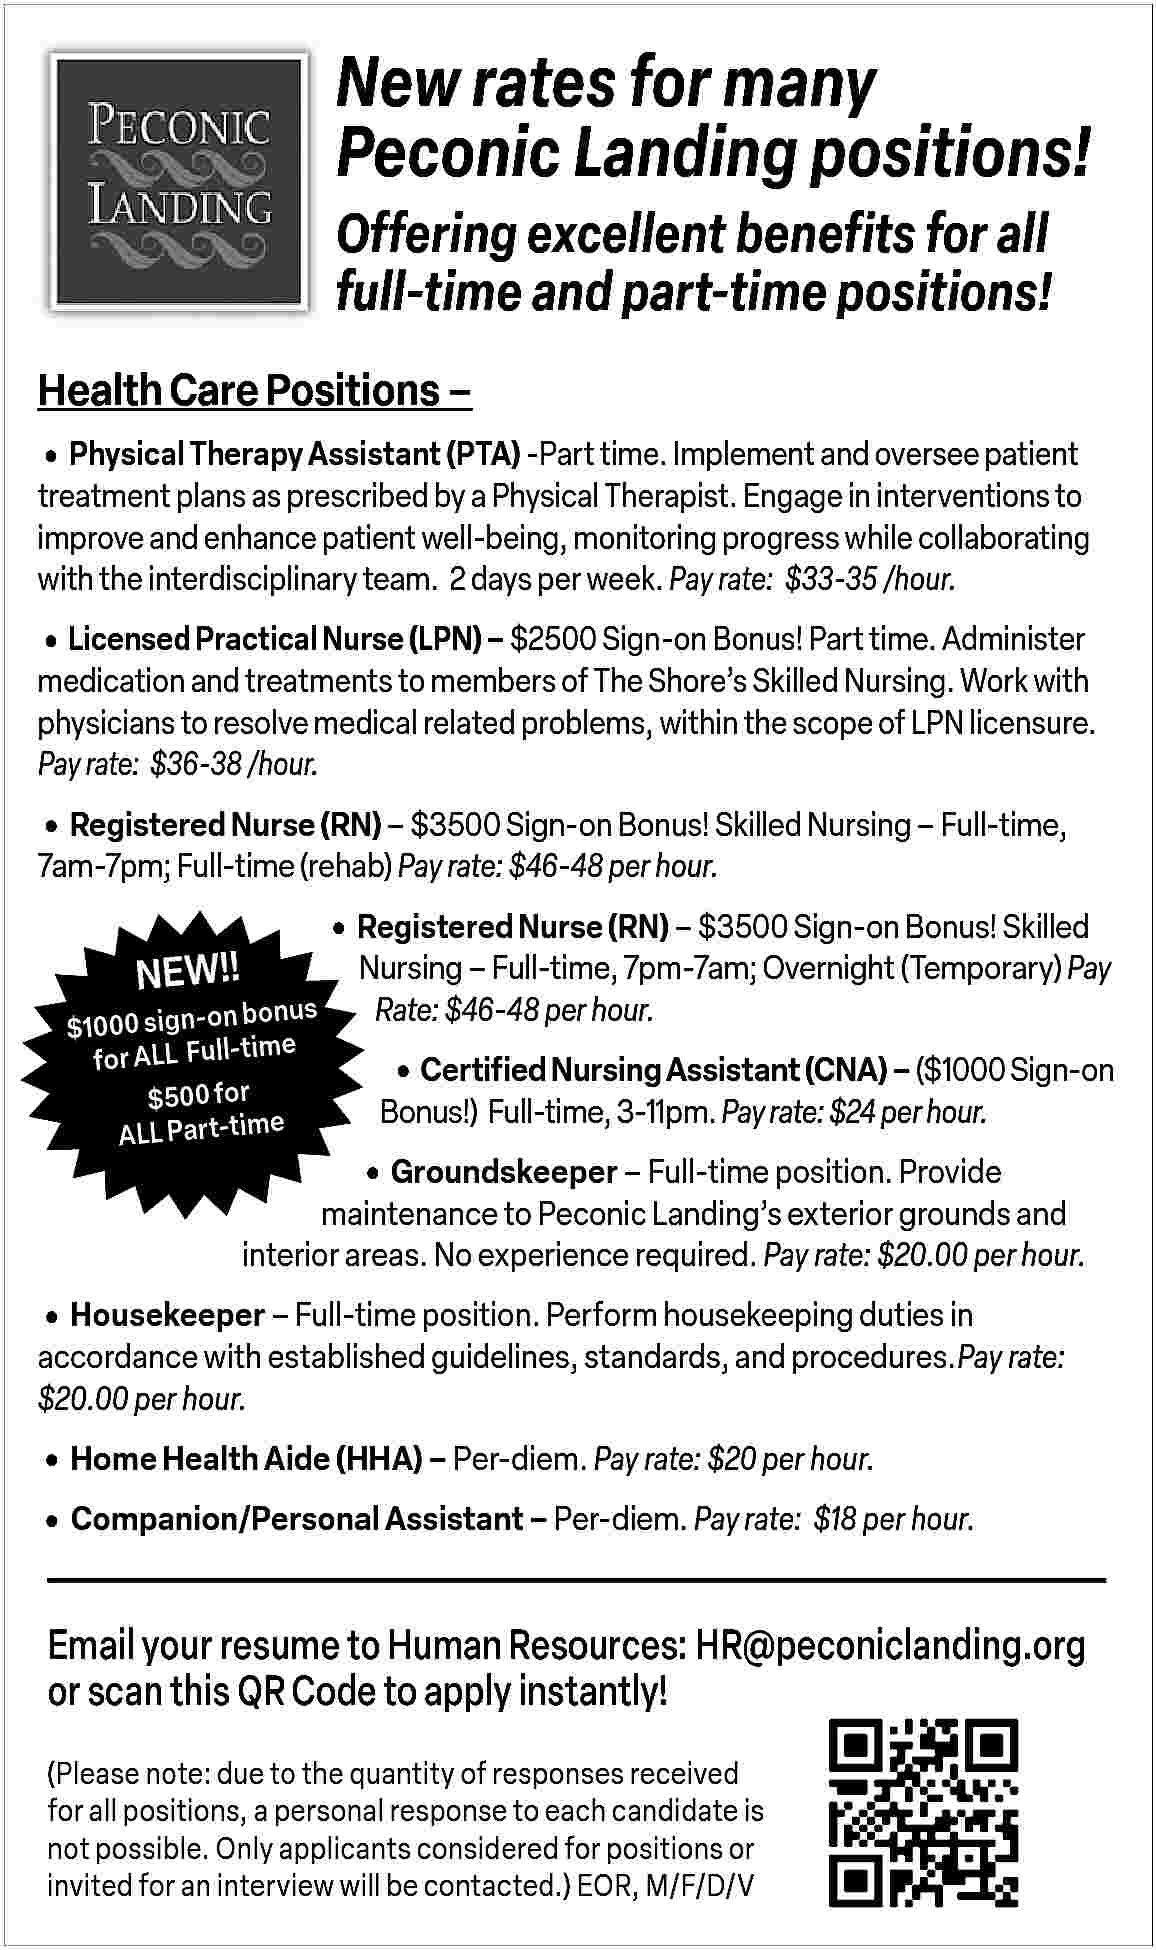 New rates for many <br>Peconic  New rates for many  Peconic Landing positions!  Offering excellent benefits for all  full-time and part-time positions!  Health Care Positions               Physical Therapy Assistant (PTA) -Part time. Implement and oversee patient  treatment plans as prescribed by a Physical Therapist. Engage in interventions to  improve and enhance patient well-being, monitoring progress while collaborating  with the interdisciplinary team. 2 days per week. Pay rate: $33-35 /hour.        Licensed Practical Nurse (LPN)     $2500 Sign-on Bonus! Part time. Administer    medication and treatments to members of The Shore   s Skilled Nursing. Work with  physicians to resolve medical related problems, within the scope of LPN licensure.  Pay rate: $36-38 /hour.        Registered Nurse (RN)     $3500 Sign-on Bonus! Skilled Nursing     Full-time,  7am-7pm; Full-time (rehab) Pay rate: $46-48 per hour.    NEW!!        Registered Nurse (RN)     $3500 Sign-on Bonus! Skilled    bonus  $1000 sign-on  e  for ALL   Full-tim  $500 for  ALL Part-time    Nursing     Full-time, 7pm-7am; Overnight (Temporary) Pay  Rate: $46-48 per hour.           Certified Nursing Assistant (CNA)     ($1000 Sign-on  Bonus!) Full-time, 3-11pm. Pay rate: $24 per hour.           Groundskeeper     Full-time position. Provide  maintenance to Peconic Landing   s exterior grounds and  interior areas. No experience required. Pay rate: $20.00 per hour.        Housekeeper     Full-time position. Perform housekeeping duties in    accordance with established guidelines, standards, and procedures.Pay rate:  $20.00 per hour.        Home Health Aide (HHA)     Per-diem. Pay rate: $20 per hour.      Companion/Personal Assistant     Per-diem. Pay rate: $18 per hour.    Email your resume to Human Resources: HR@peconiclanding.org  or scan this QR Code to apply instantly!  (Please note: due to the quantity of responses received  for all positions, a personal response to each candidate is  not possible. Only applicants considered for positions or  invited for an interview will be contacted.) EOR, M/F/D/V     